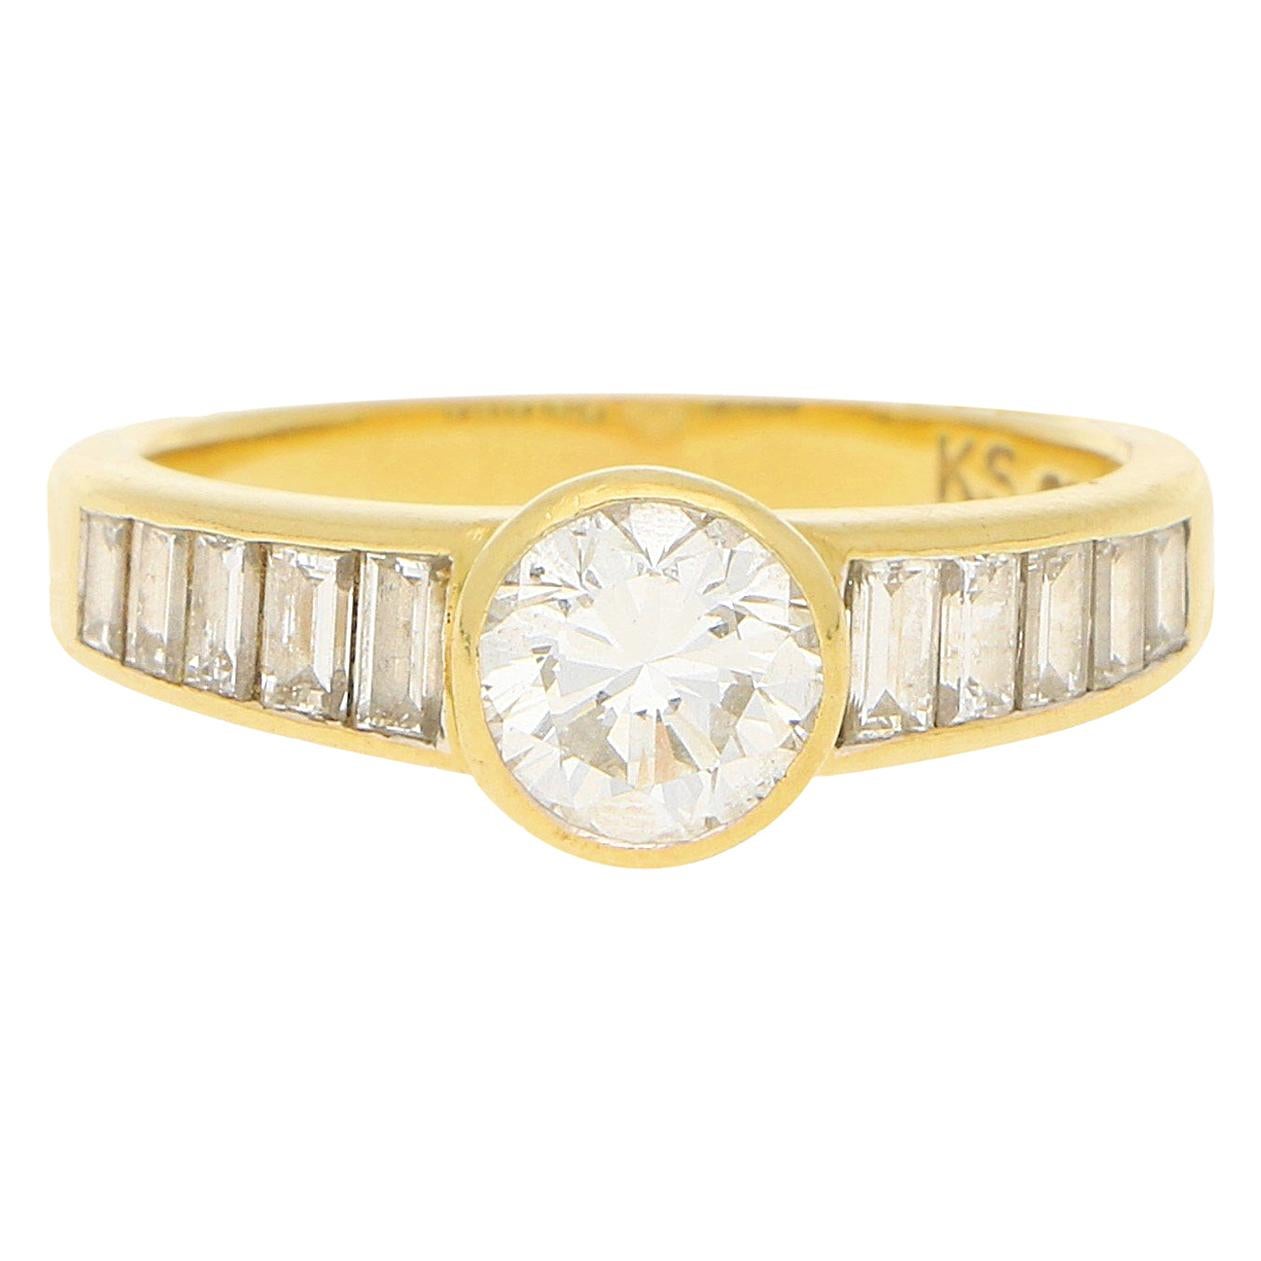 Art Deco Style Diamond Engagement Ring Set in 18k Yellow Gold